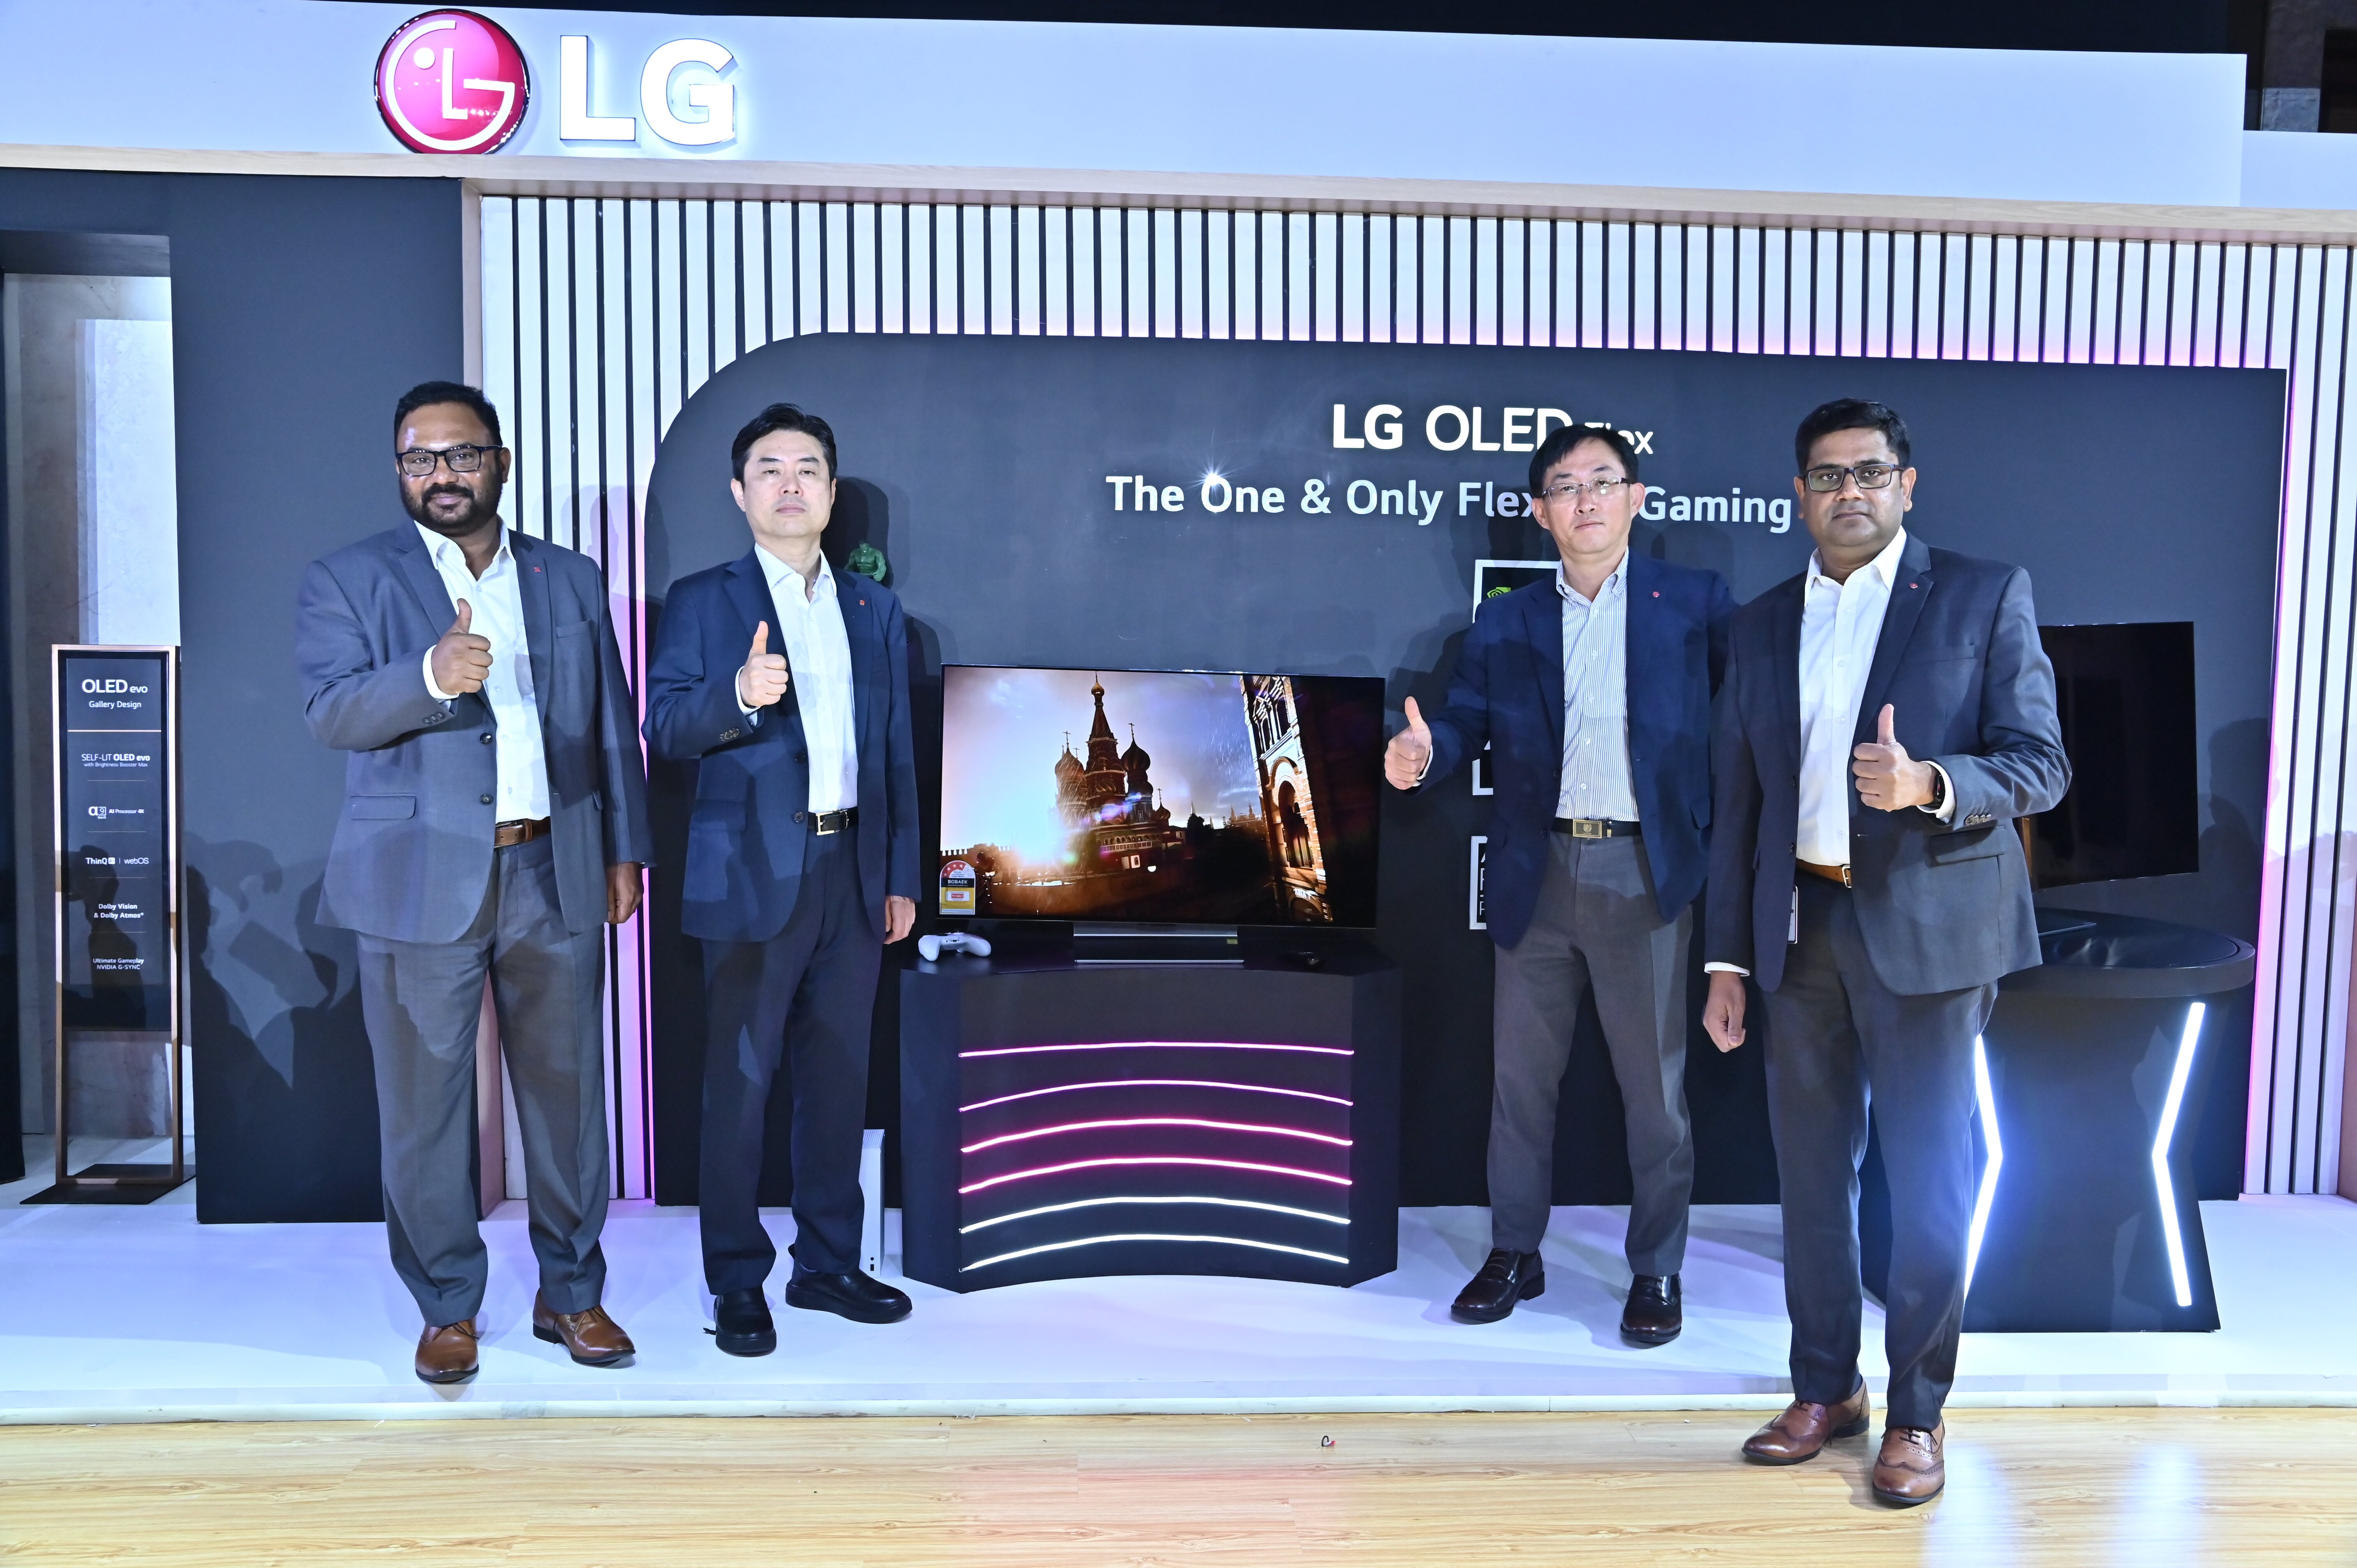 LG CELEBRATES 10 YEARS OF INNOVATION WITH LAUNCH OF BIGGEST EVER LINEUP OF OLED TVs